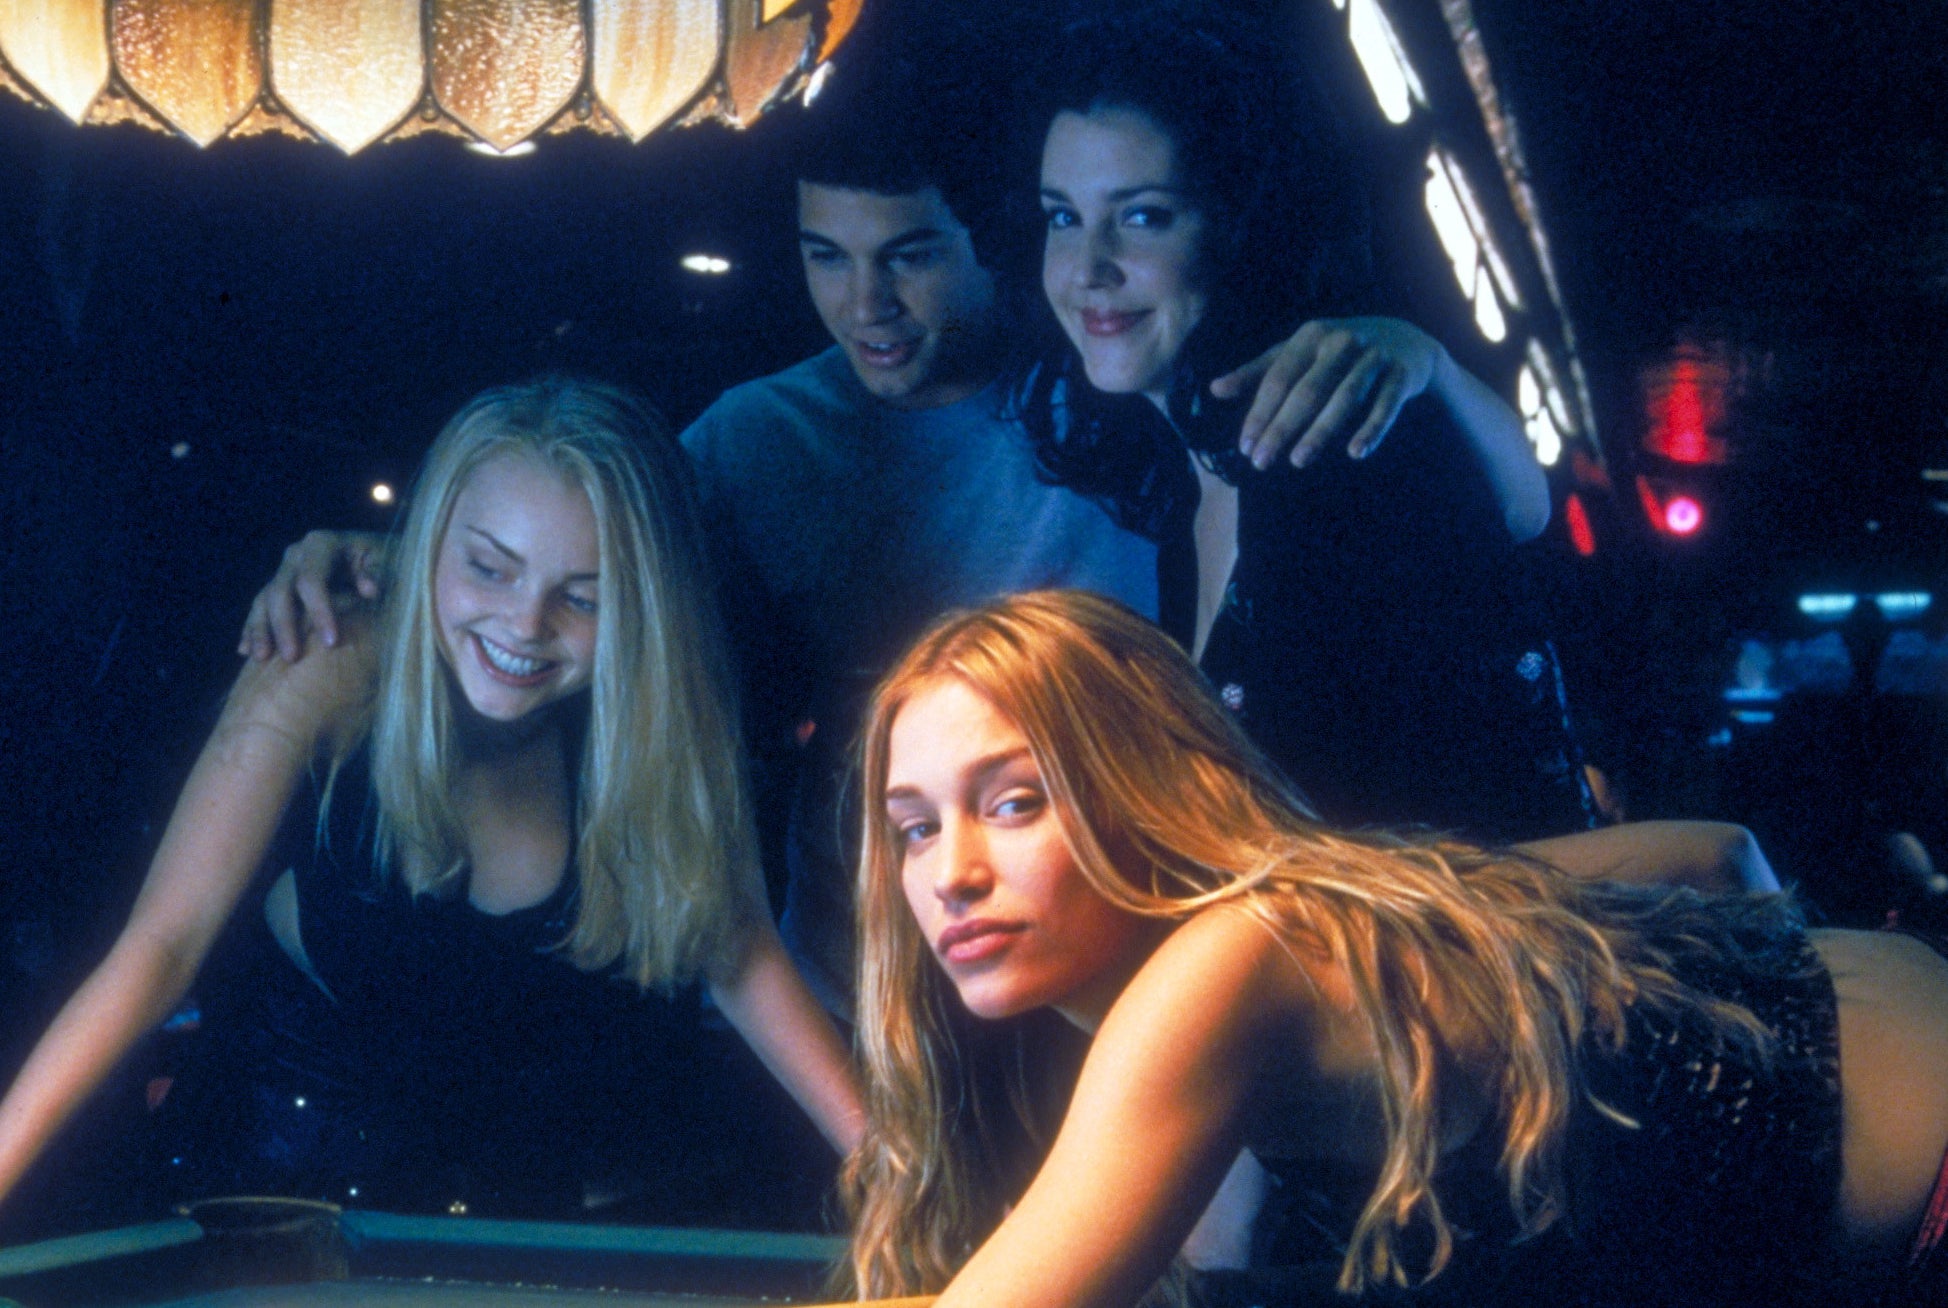 Melanie poses at a pool table with her co-stars